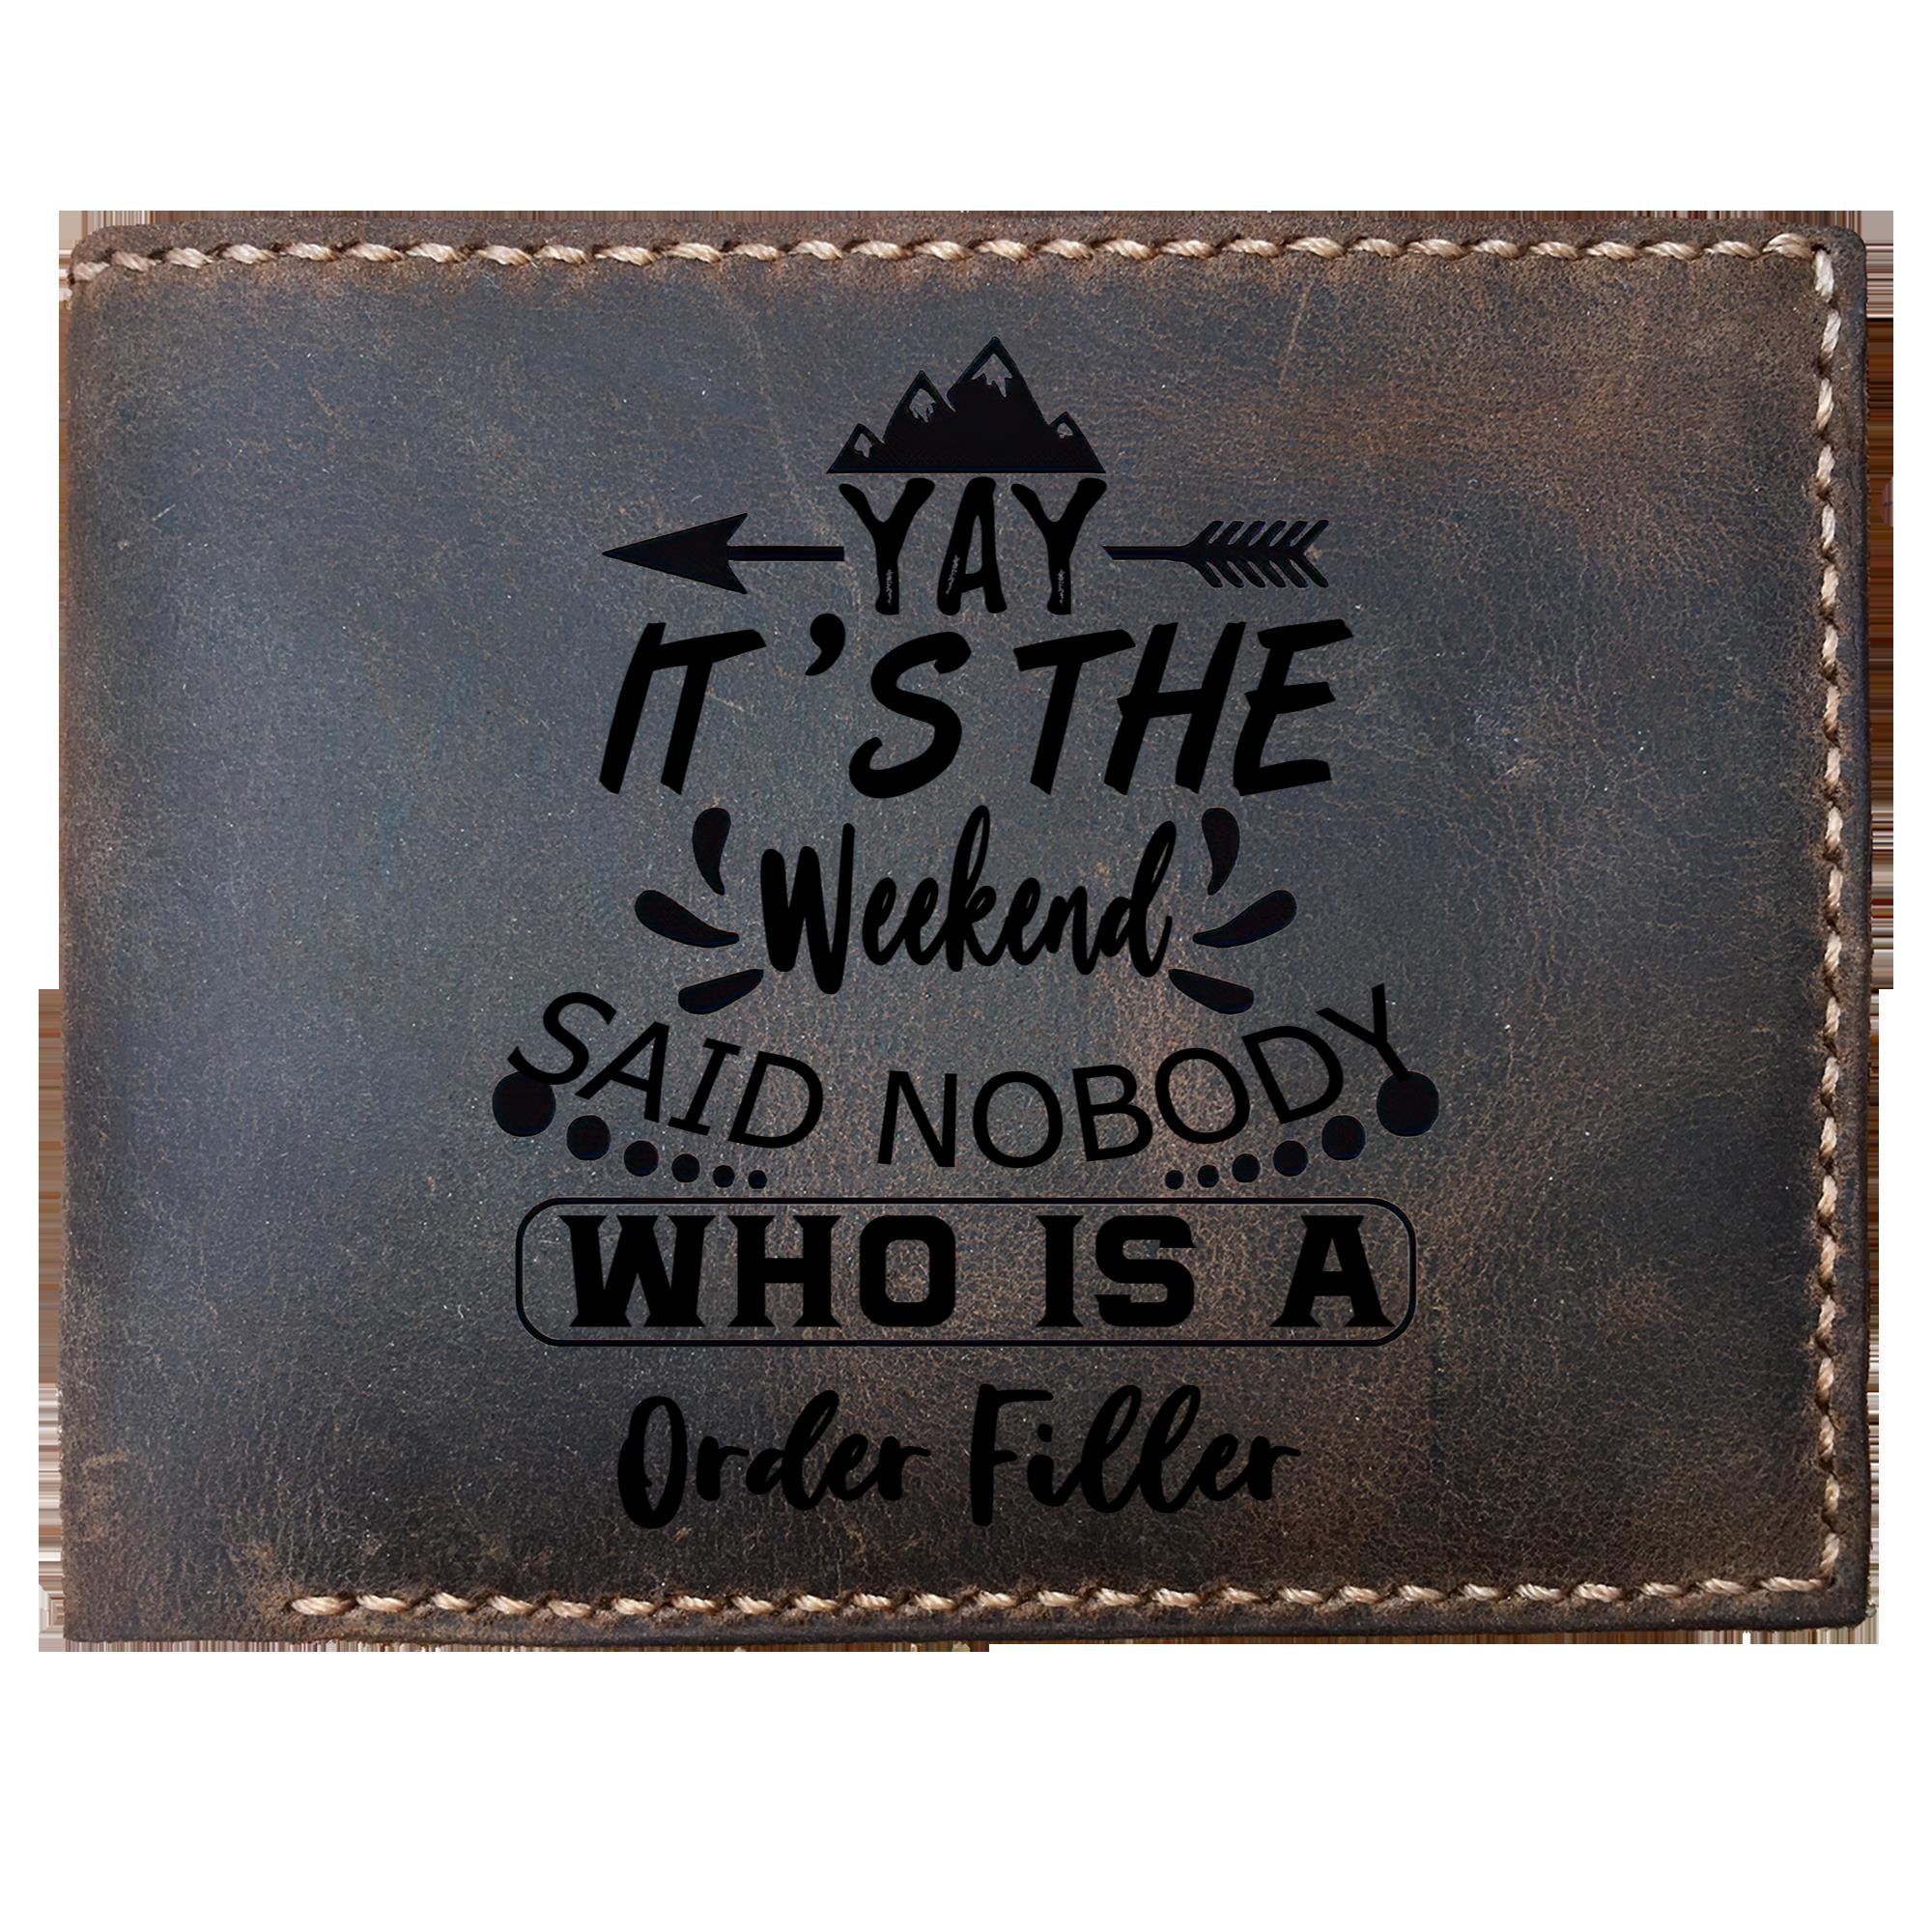 Skitongifts Funny Custom Laser Engraved Bifold Leather Wallet For Men, It's The Weekend Said Nobody Who Is A Order Filler, Father's Day Gifts